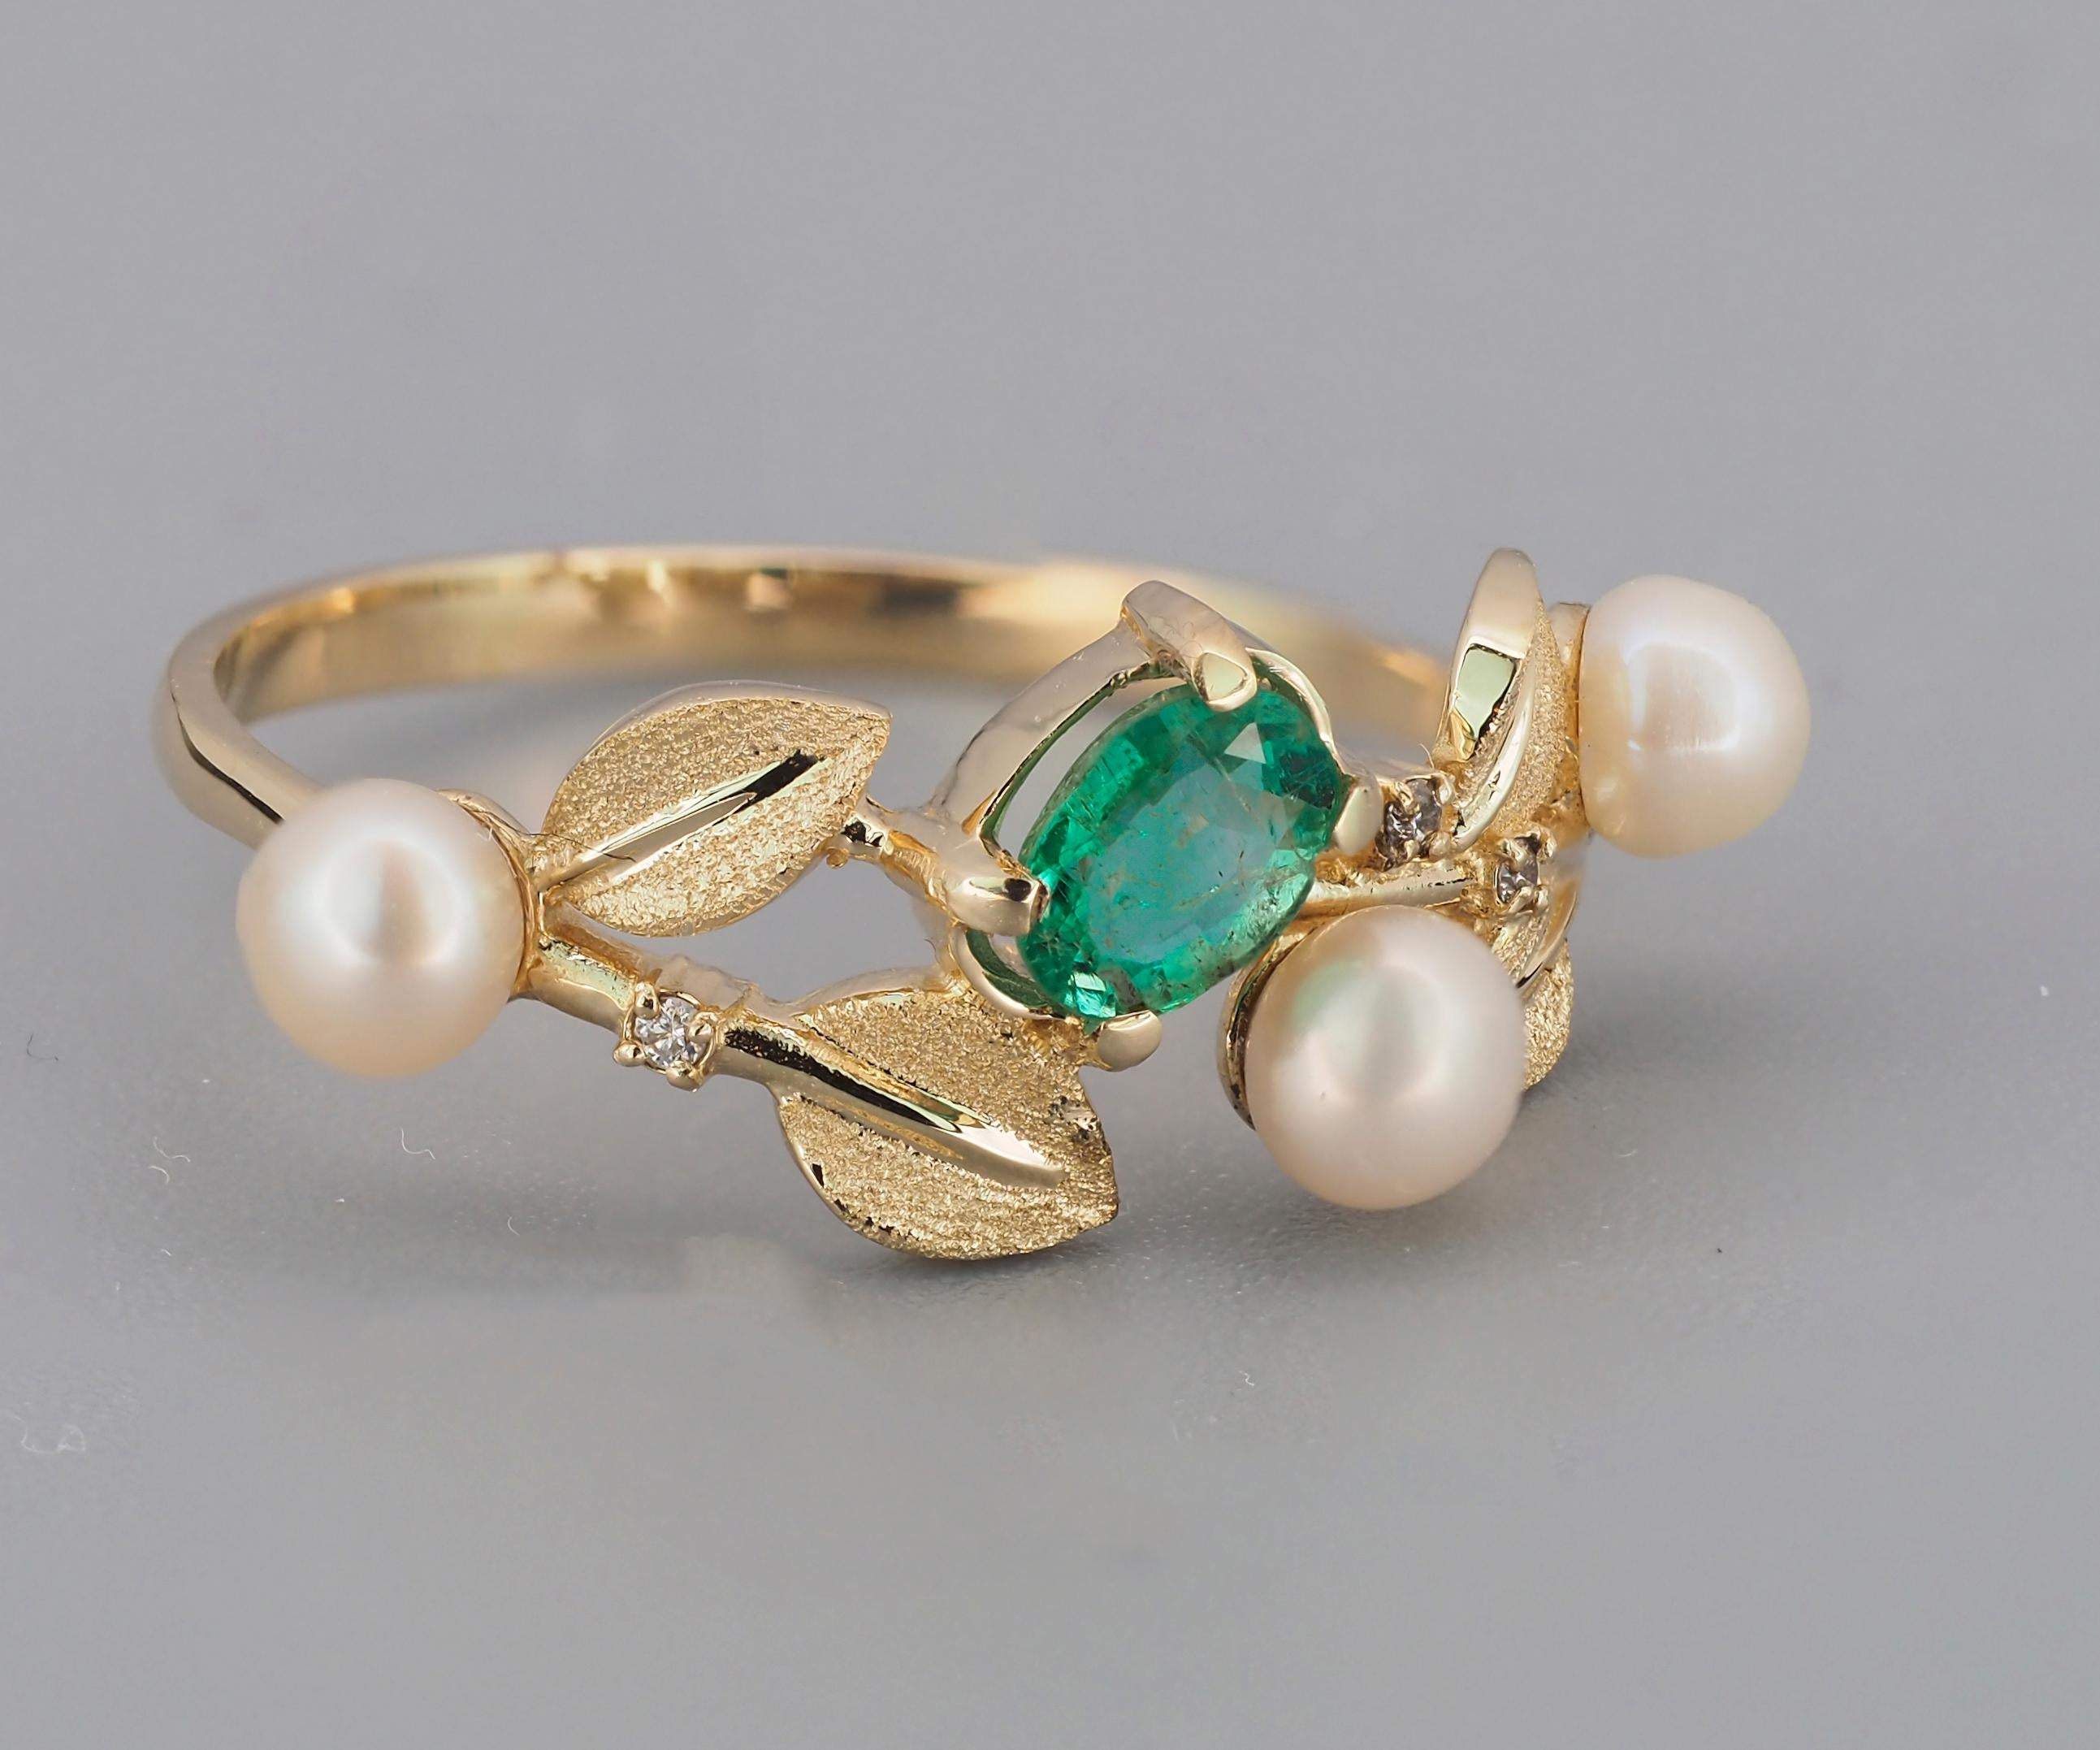 Modern 14k Gold Ring with Emerald, Pearls and Diamonds